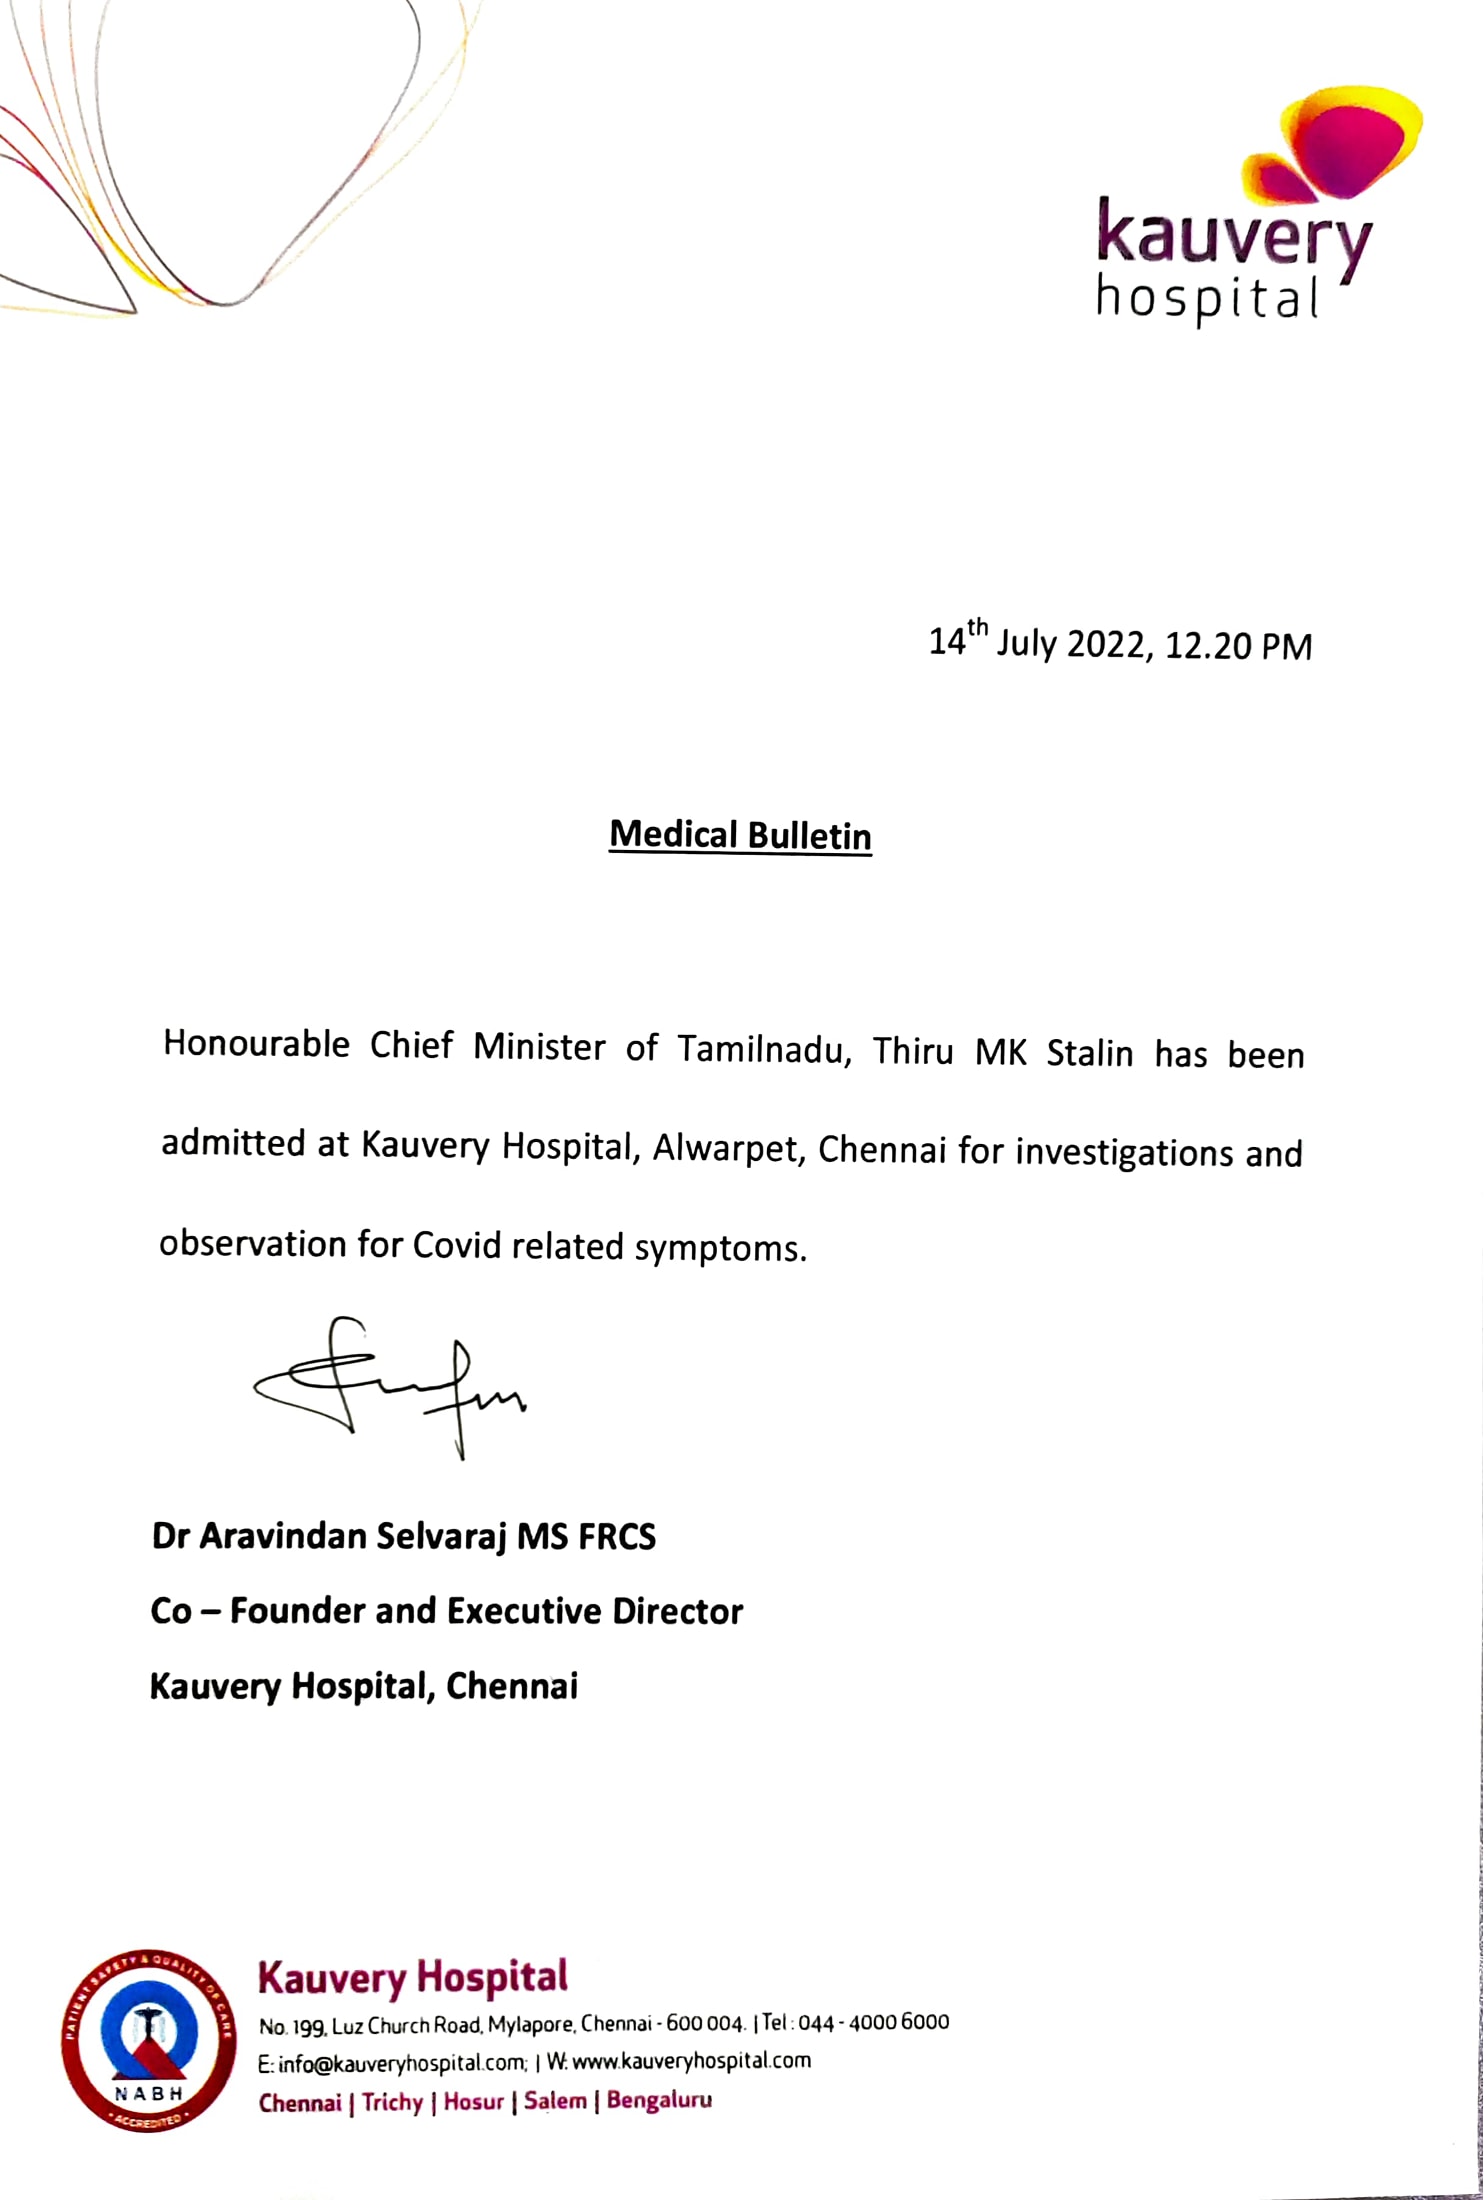 tamilnadu cm hospitalized after tested positive for covid infection